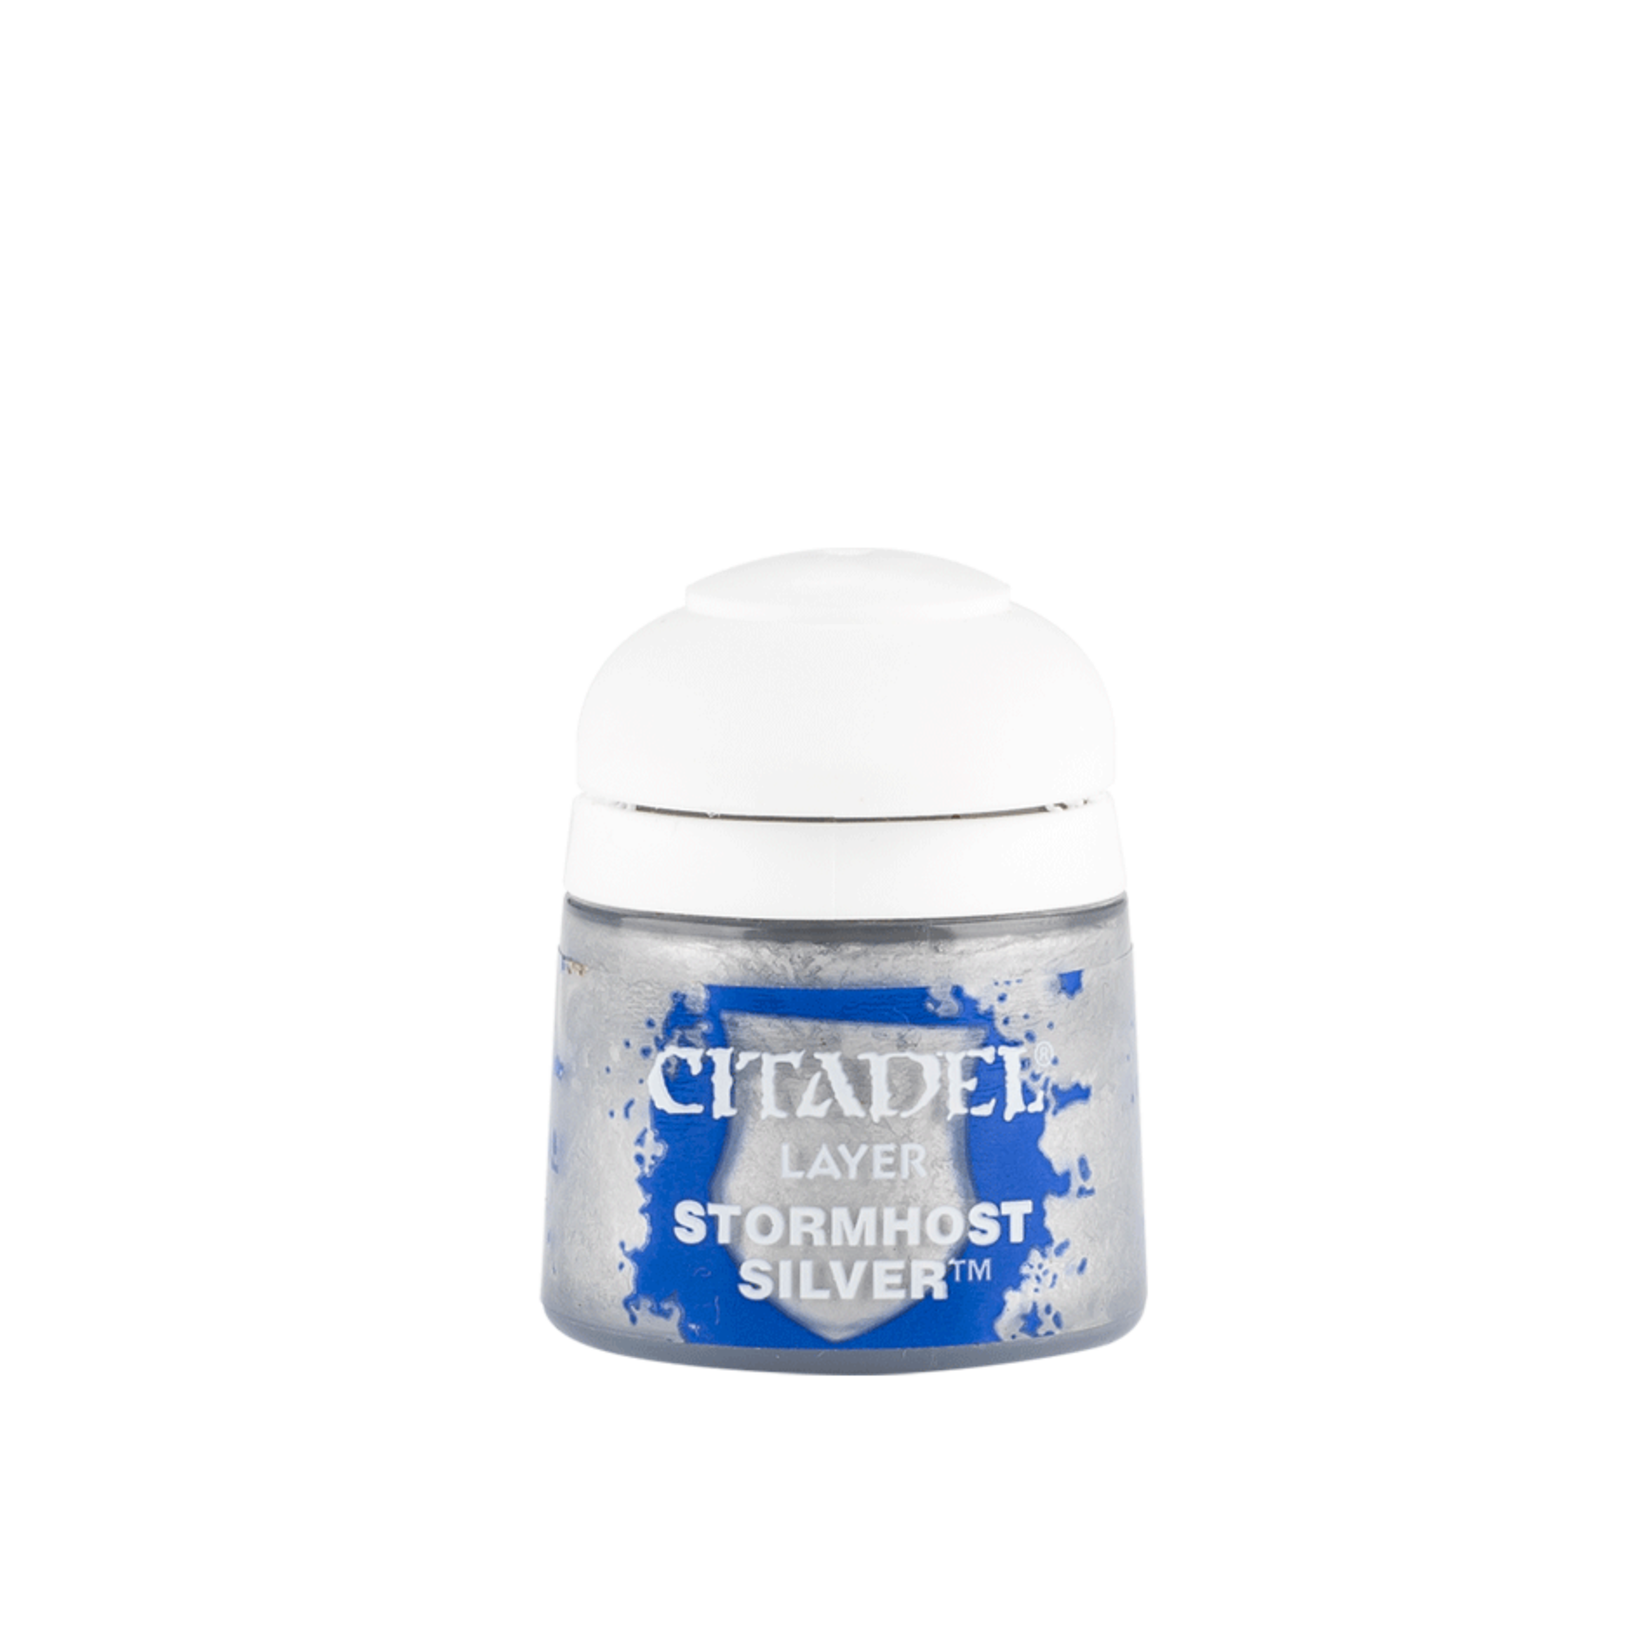 Paint - Layer 22-75 LAYER Stormhost Silver (12ml)